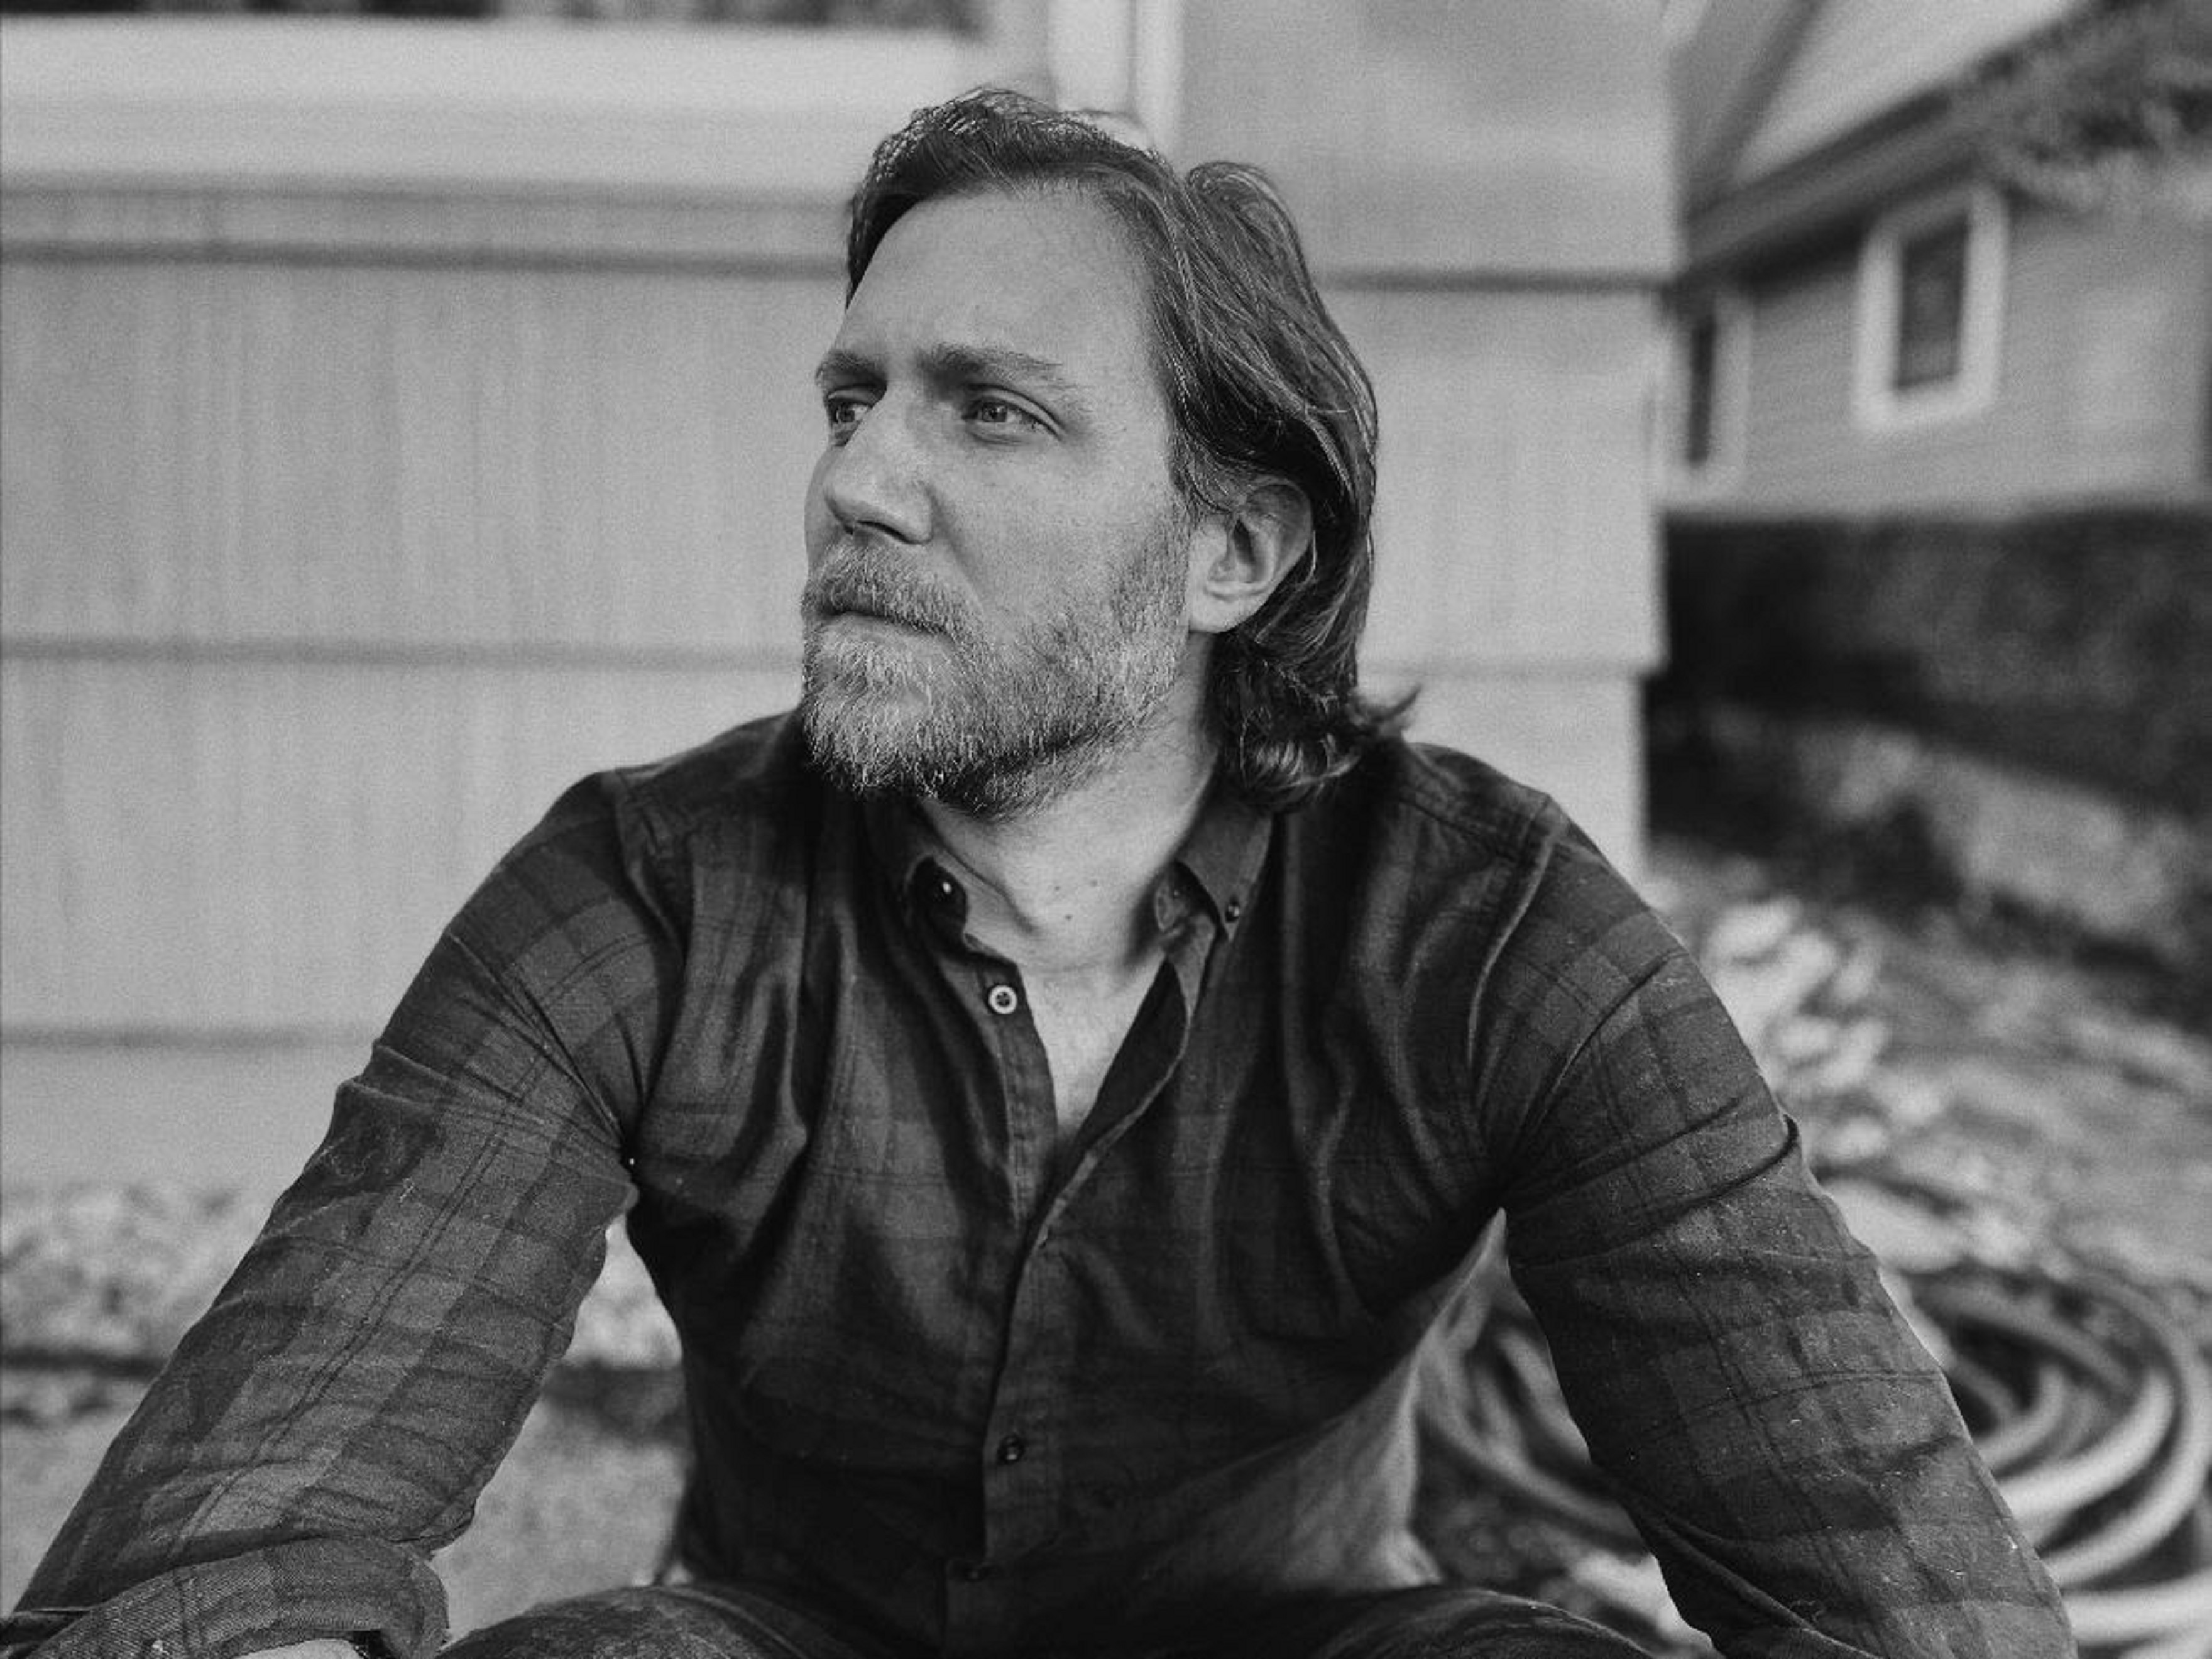 Folk Artist Eddie Berman Reflects On Disconnection, Reconnecting With The Present On New Single, “The Wheel”